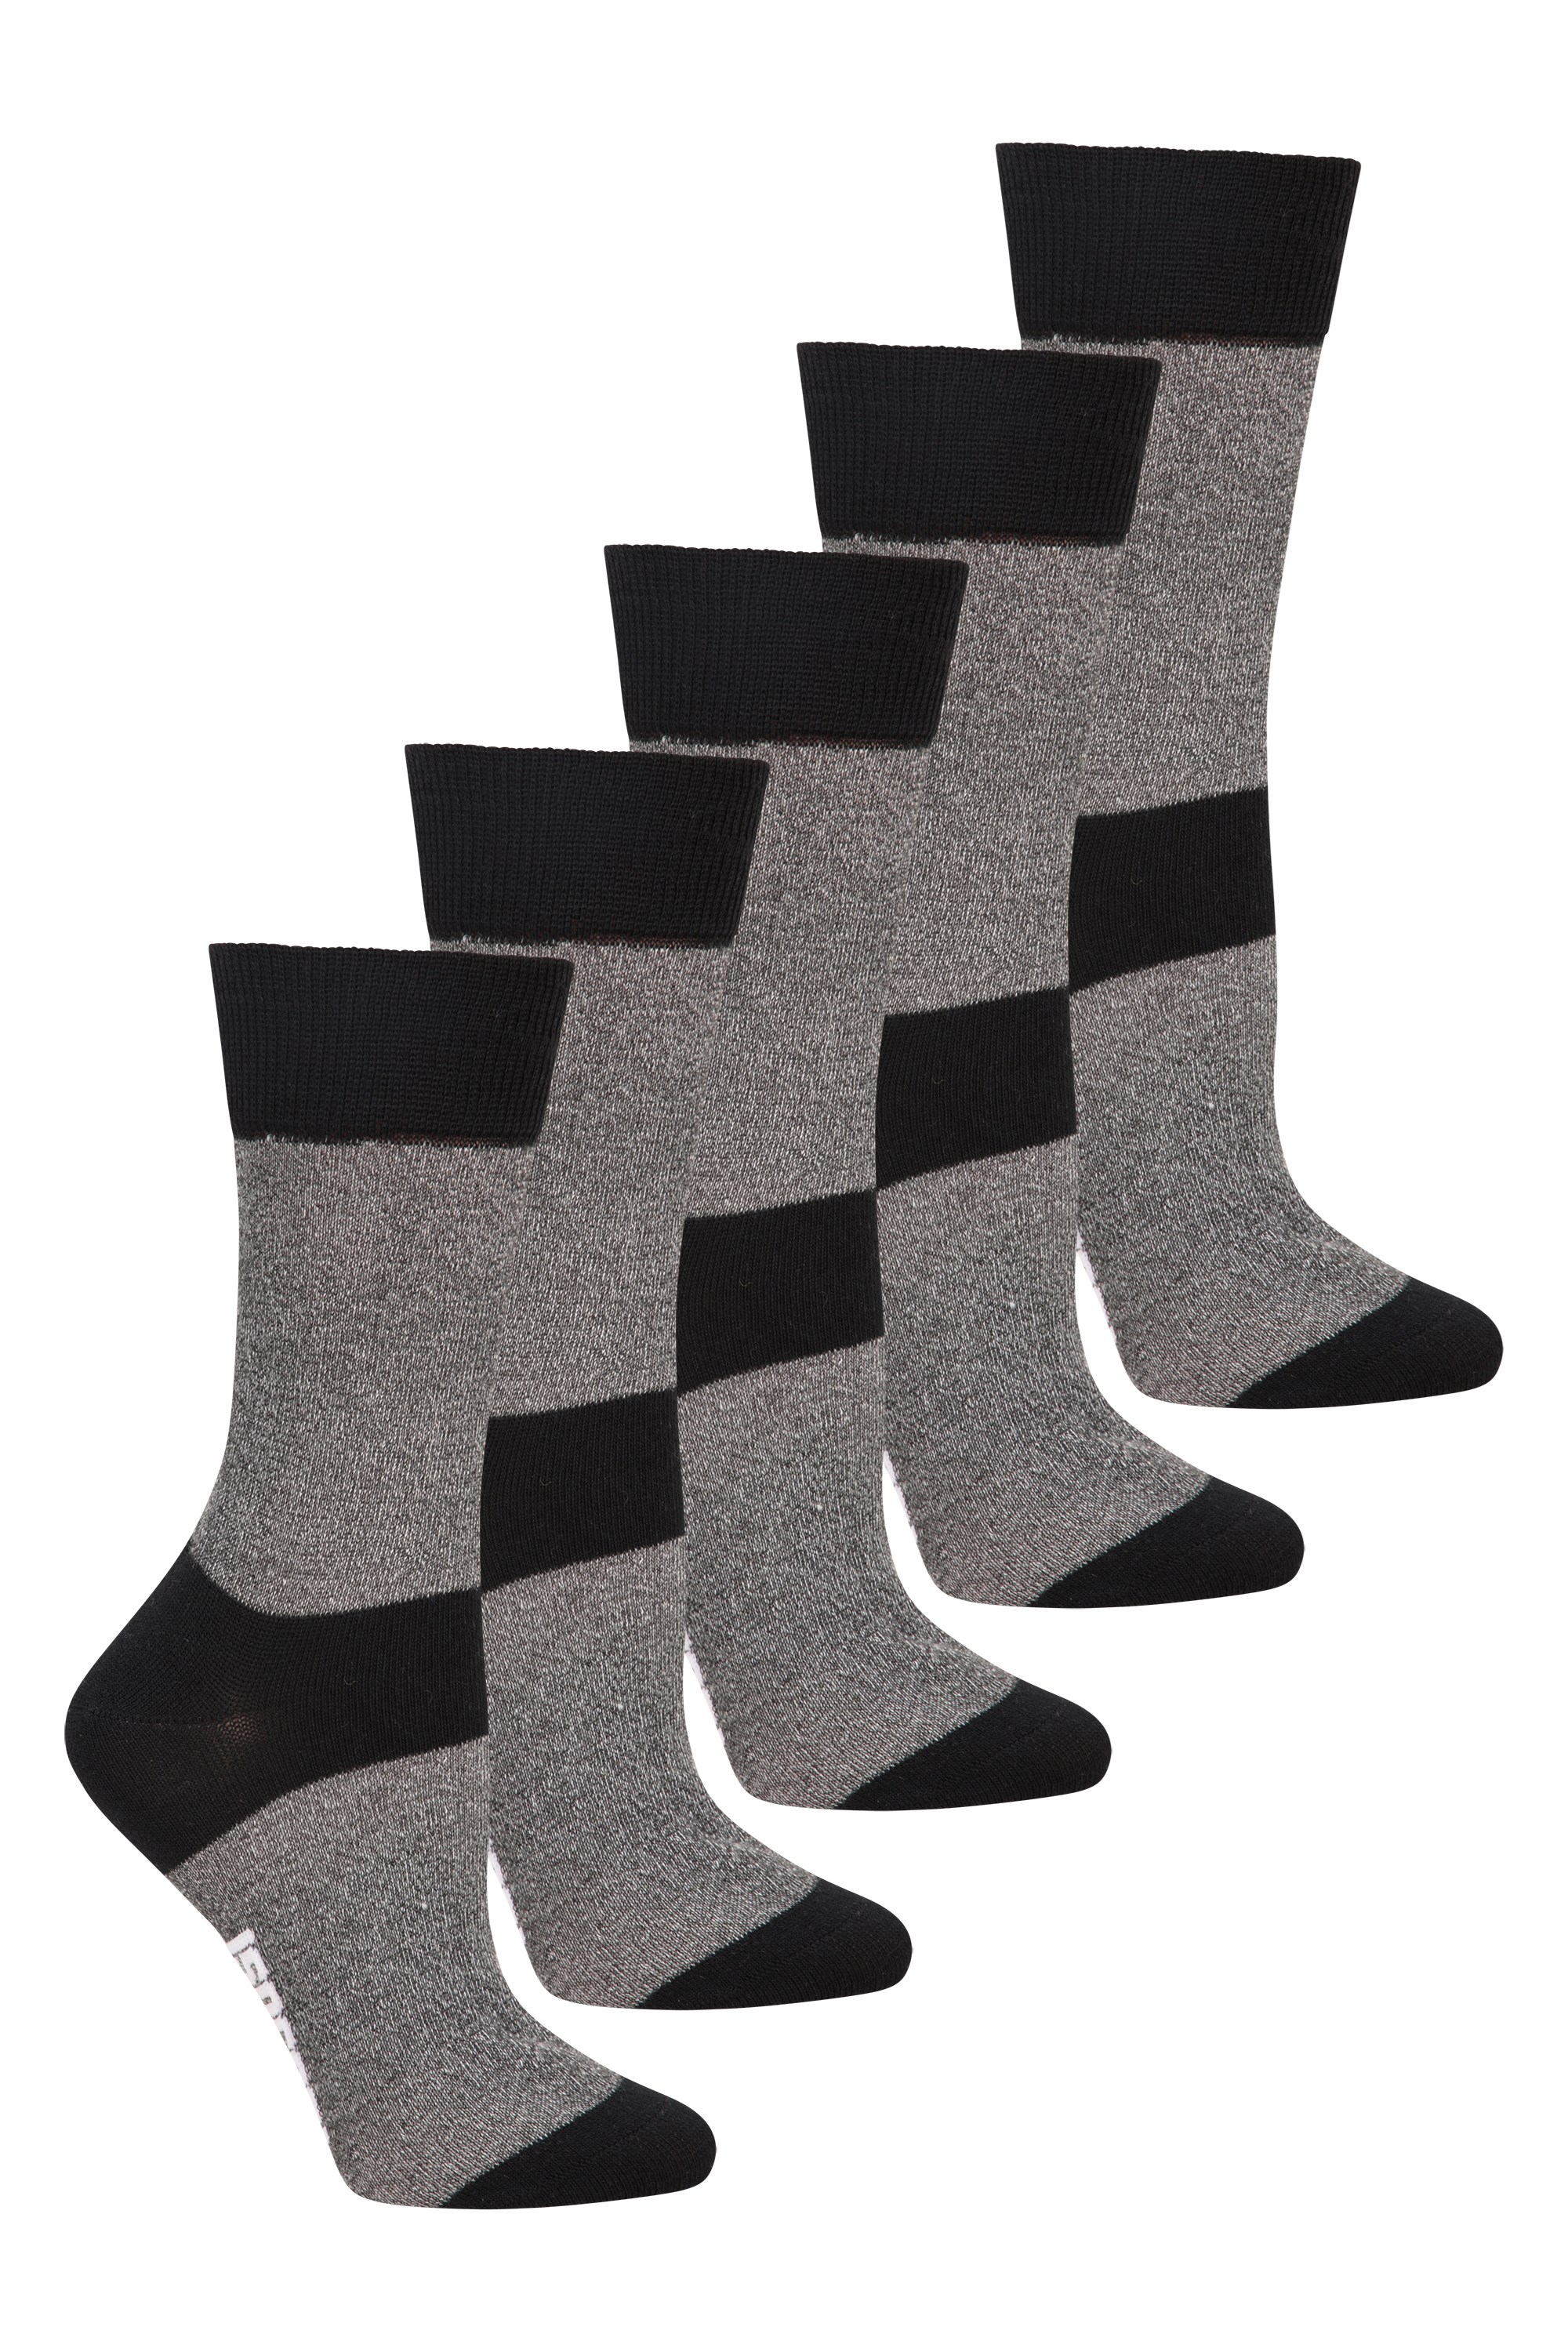 Mountain Warehouse Hommes IsoCool Outdoor Sock Chaussettes 